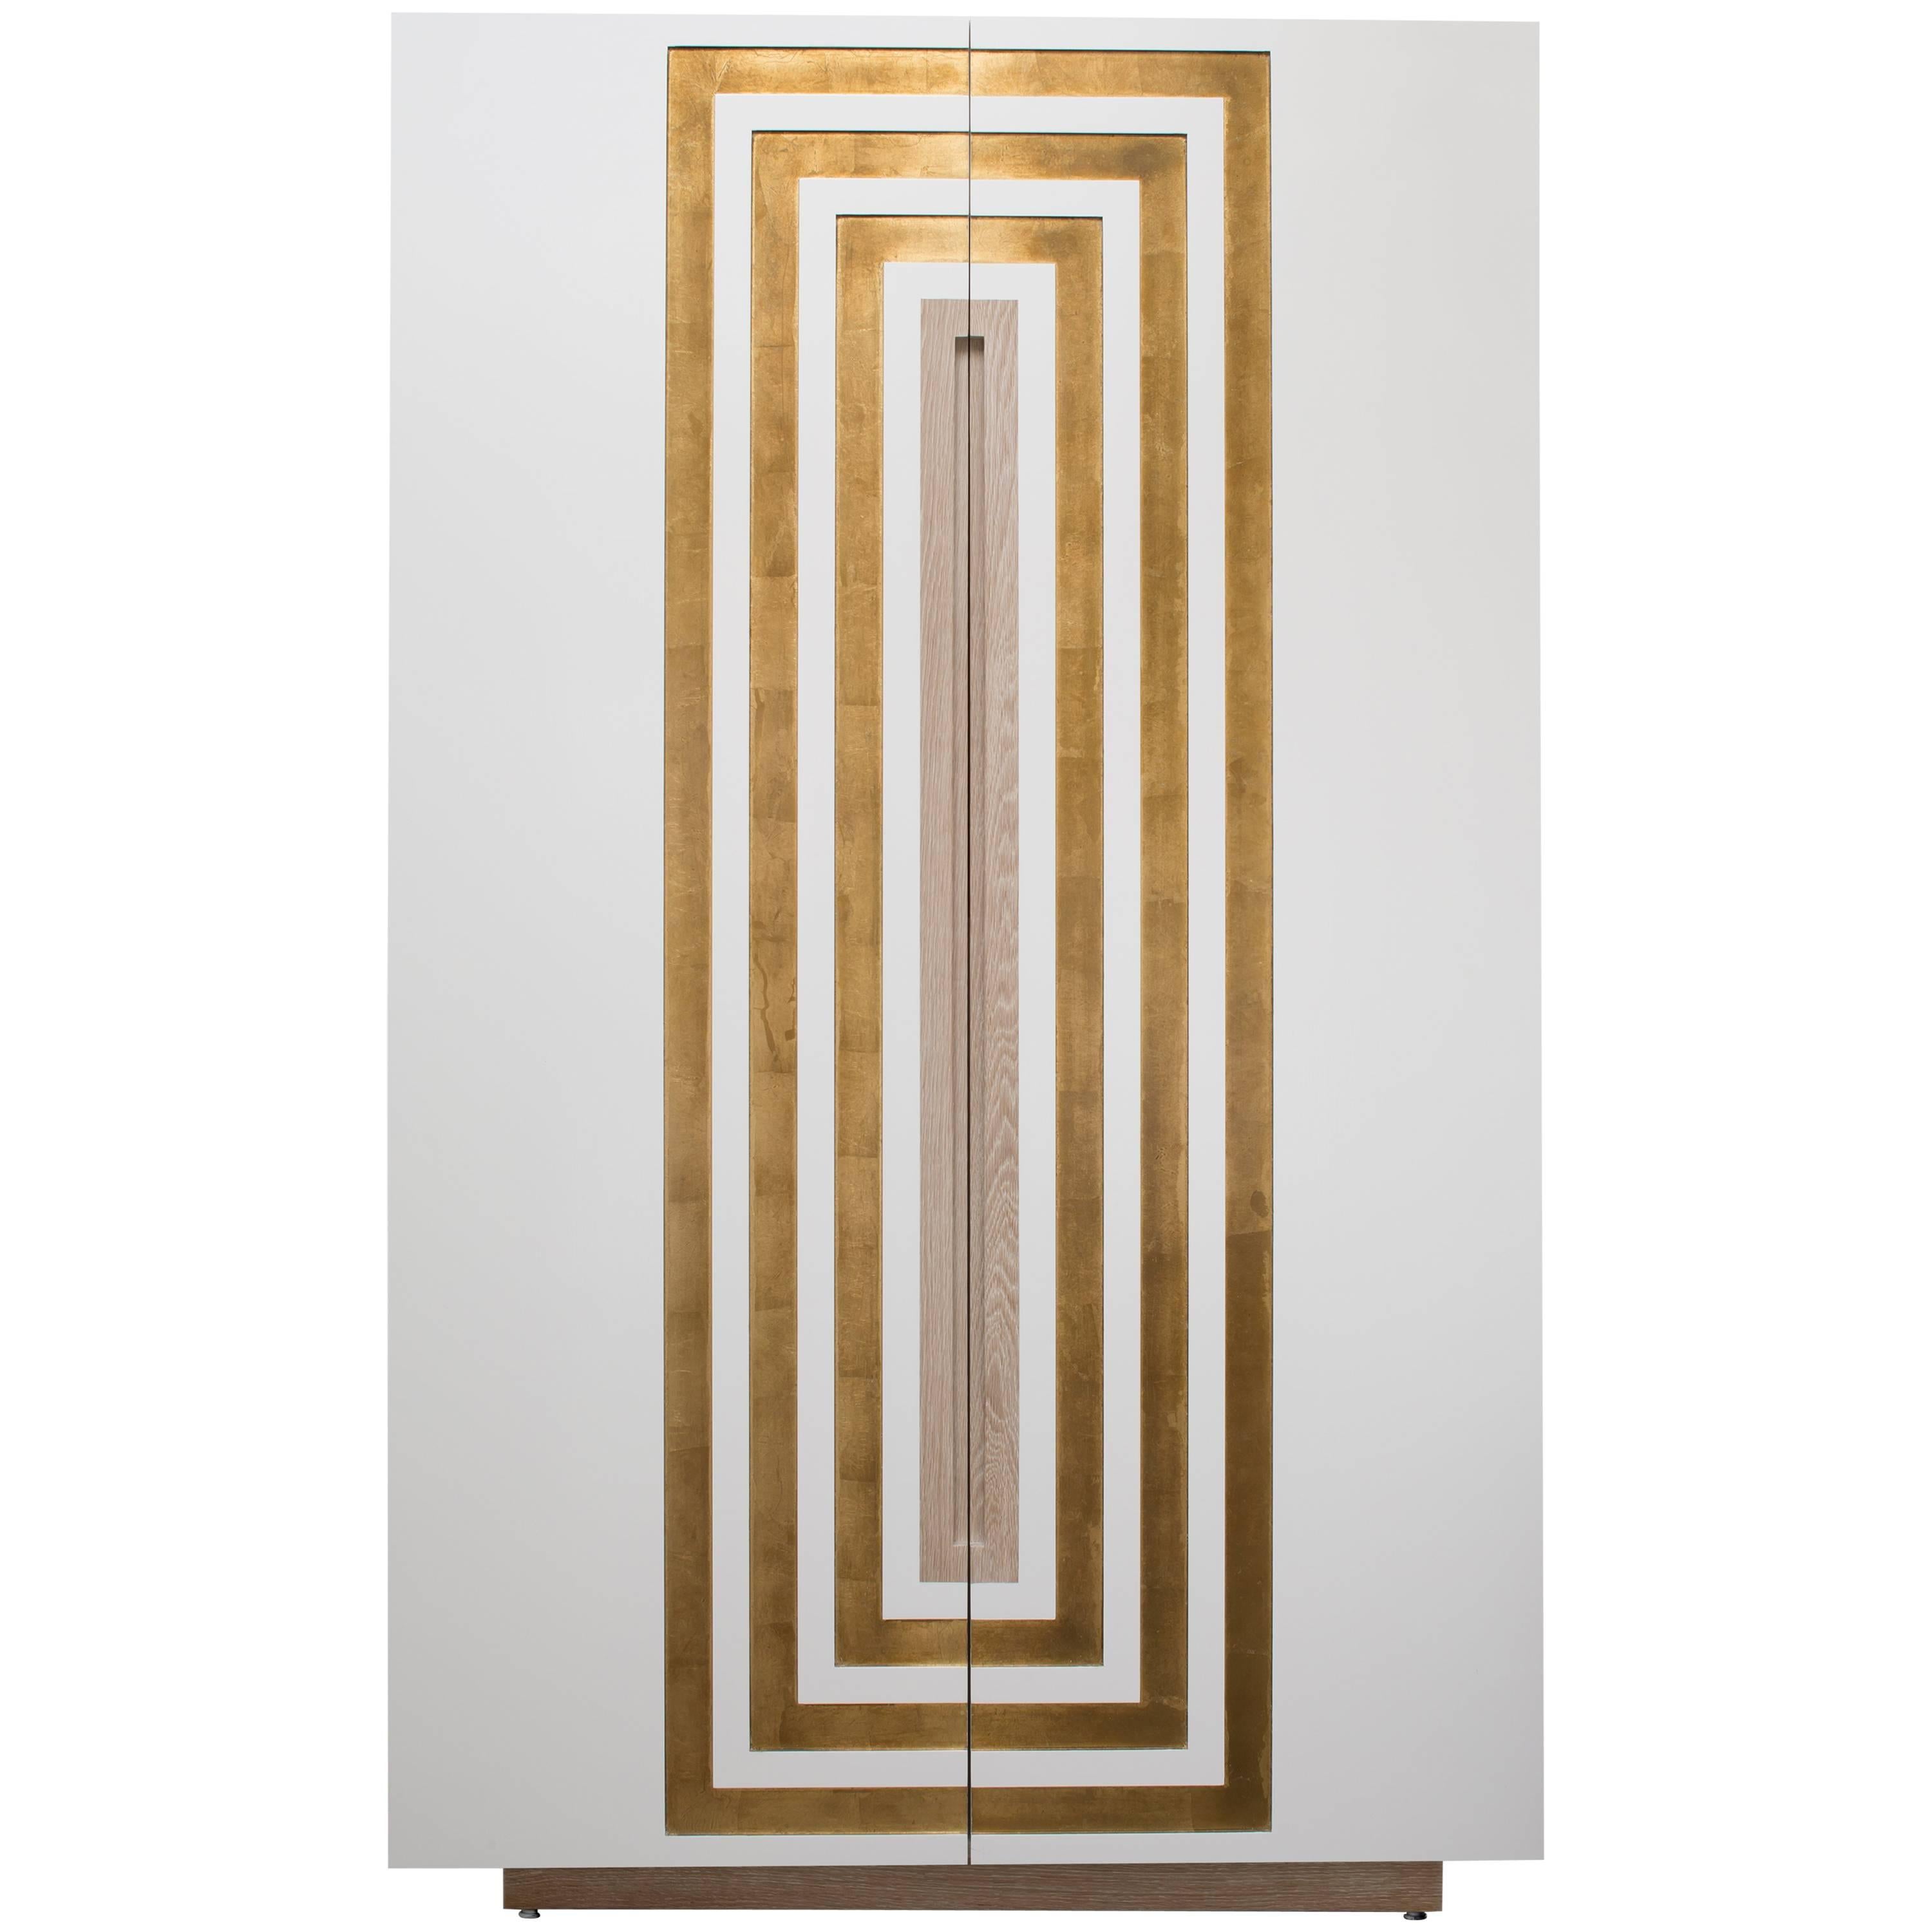 CELESTE BAR CABINET - Modern White Lacquer Oak Body Cabinet with Gold Leaf Inlay